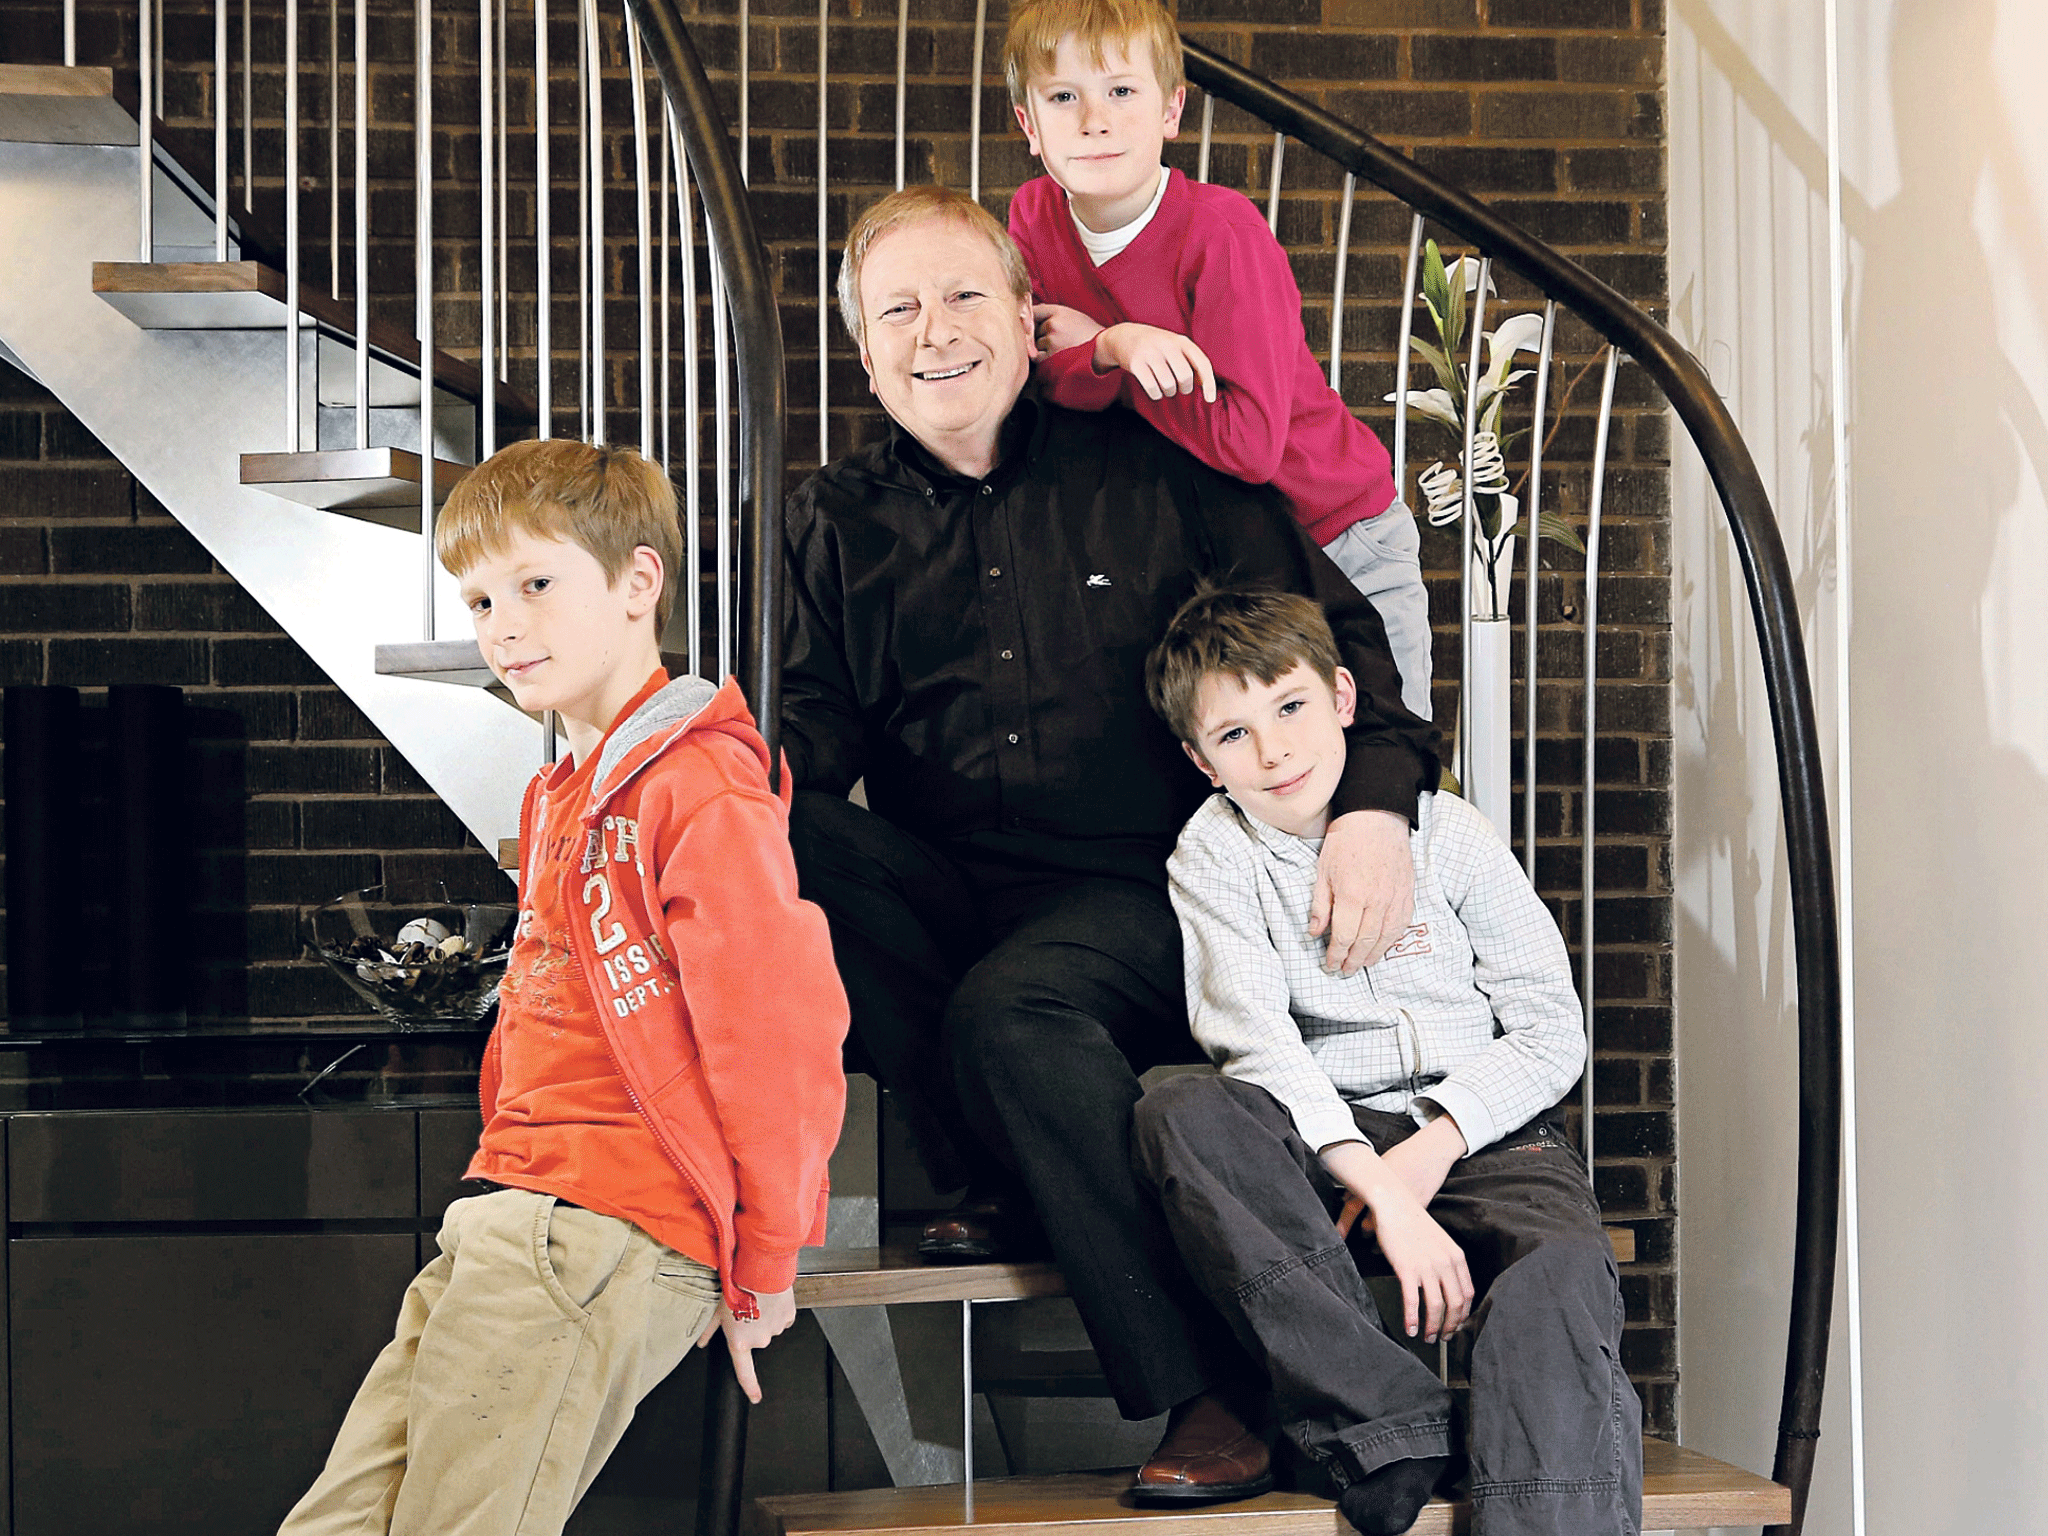 All boys together: Ian Mucklejohn with sons (L to R) Lars, Ian and Piers